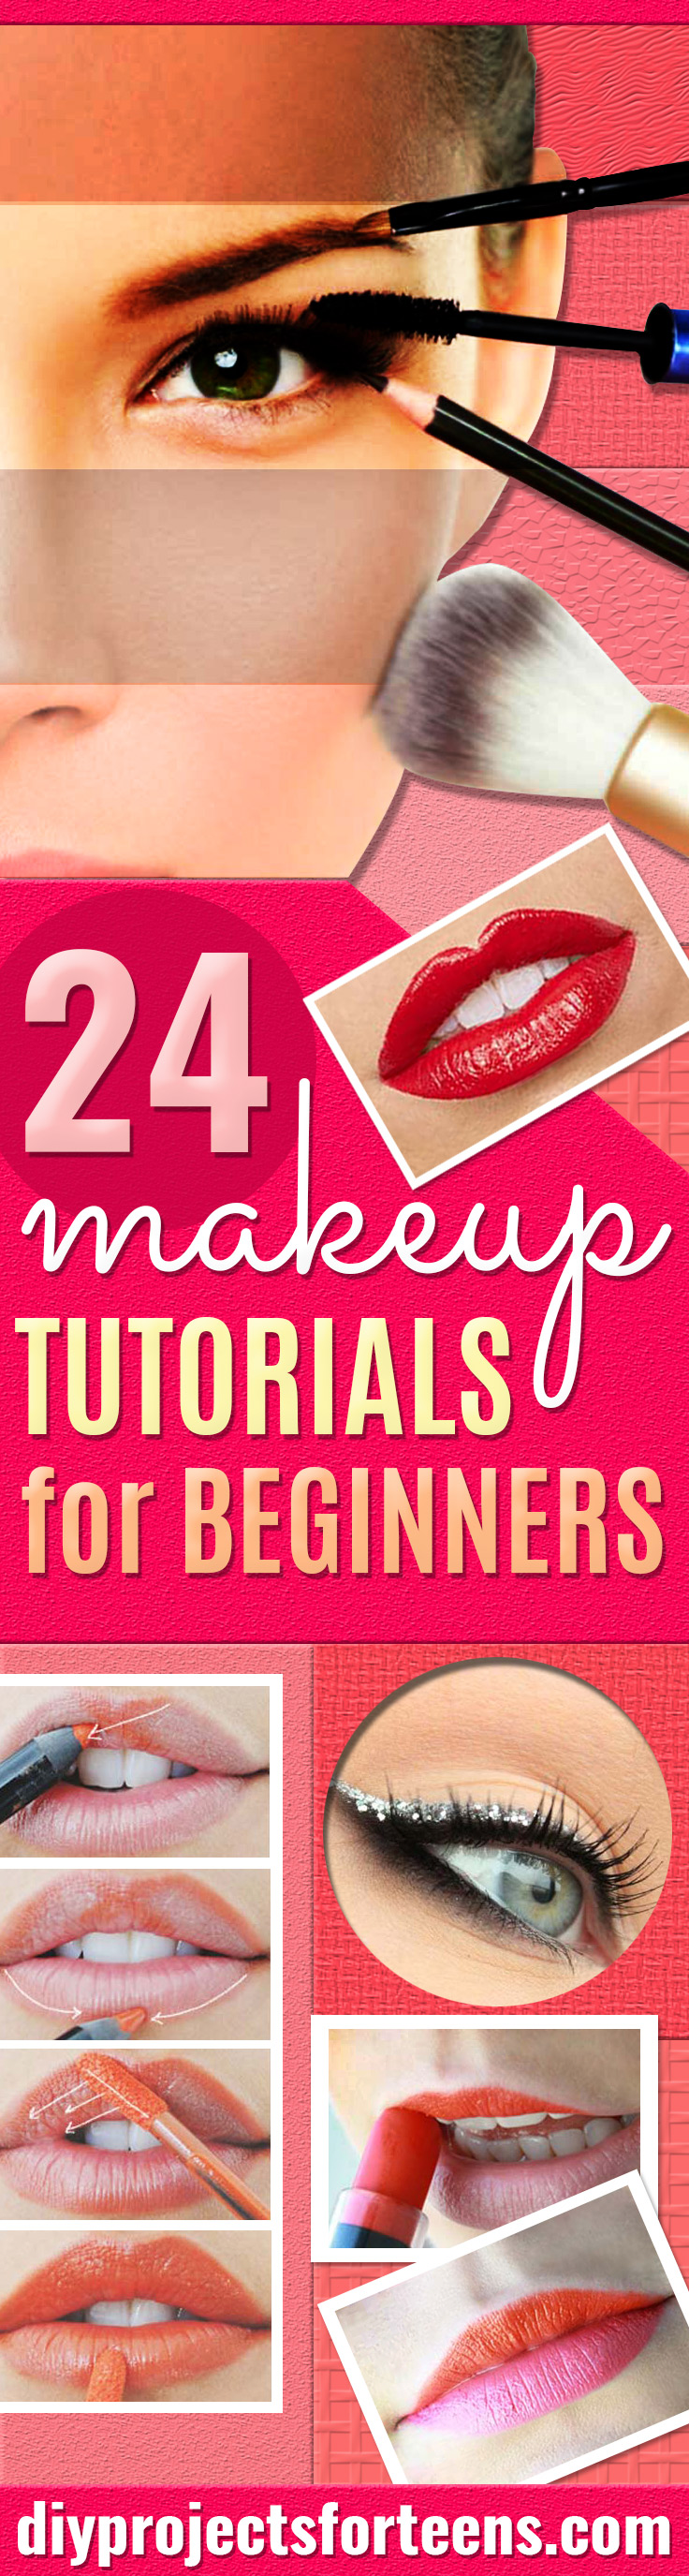 Best Makeup Tutorials for Teens - Easy Makeup Ideas for Beginners - Step by Step Tutorials for Foundation, Eye Shadow, Lipstick, Cheeks, Contour, Eyebrows and Eyes - Awesome Makeup Hacks and Tips for Simple DIY Beauty - Day and Evening Looks http://diyprojectsforteens.com/makeup-tutorials-teens 